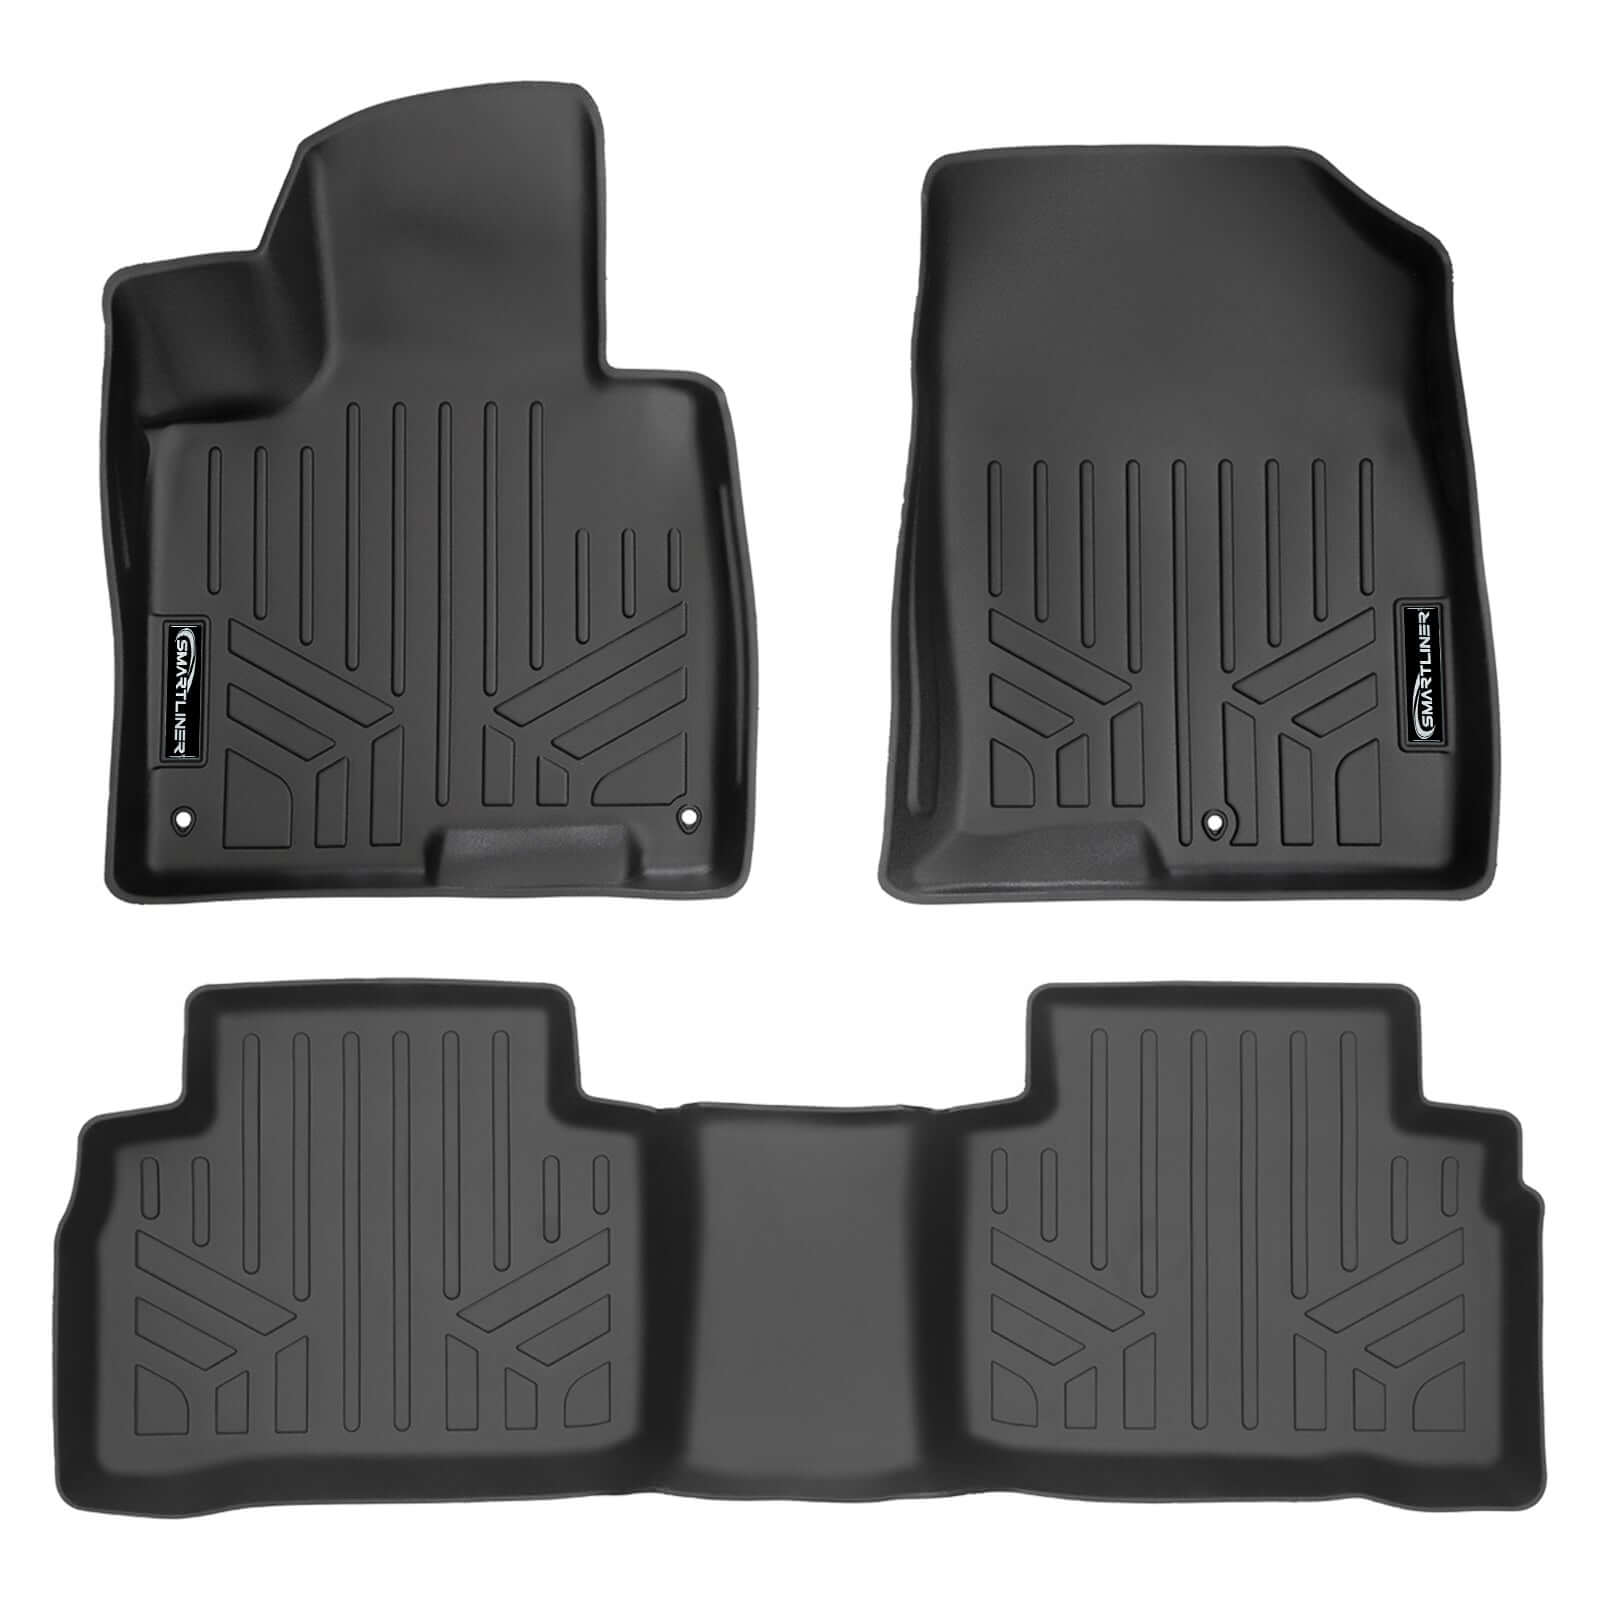 SMARTLINER Custom Fit Floor Liners For 2023-2025 Kia Sportage (Does Not fit with Subwoofer in Cargo Area)